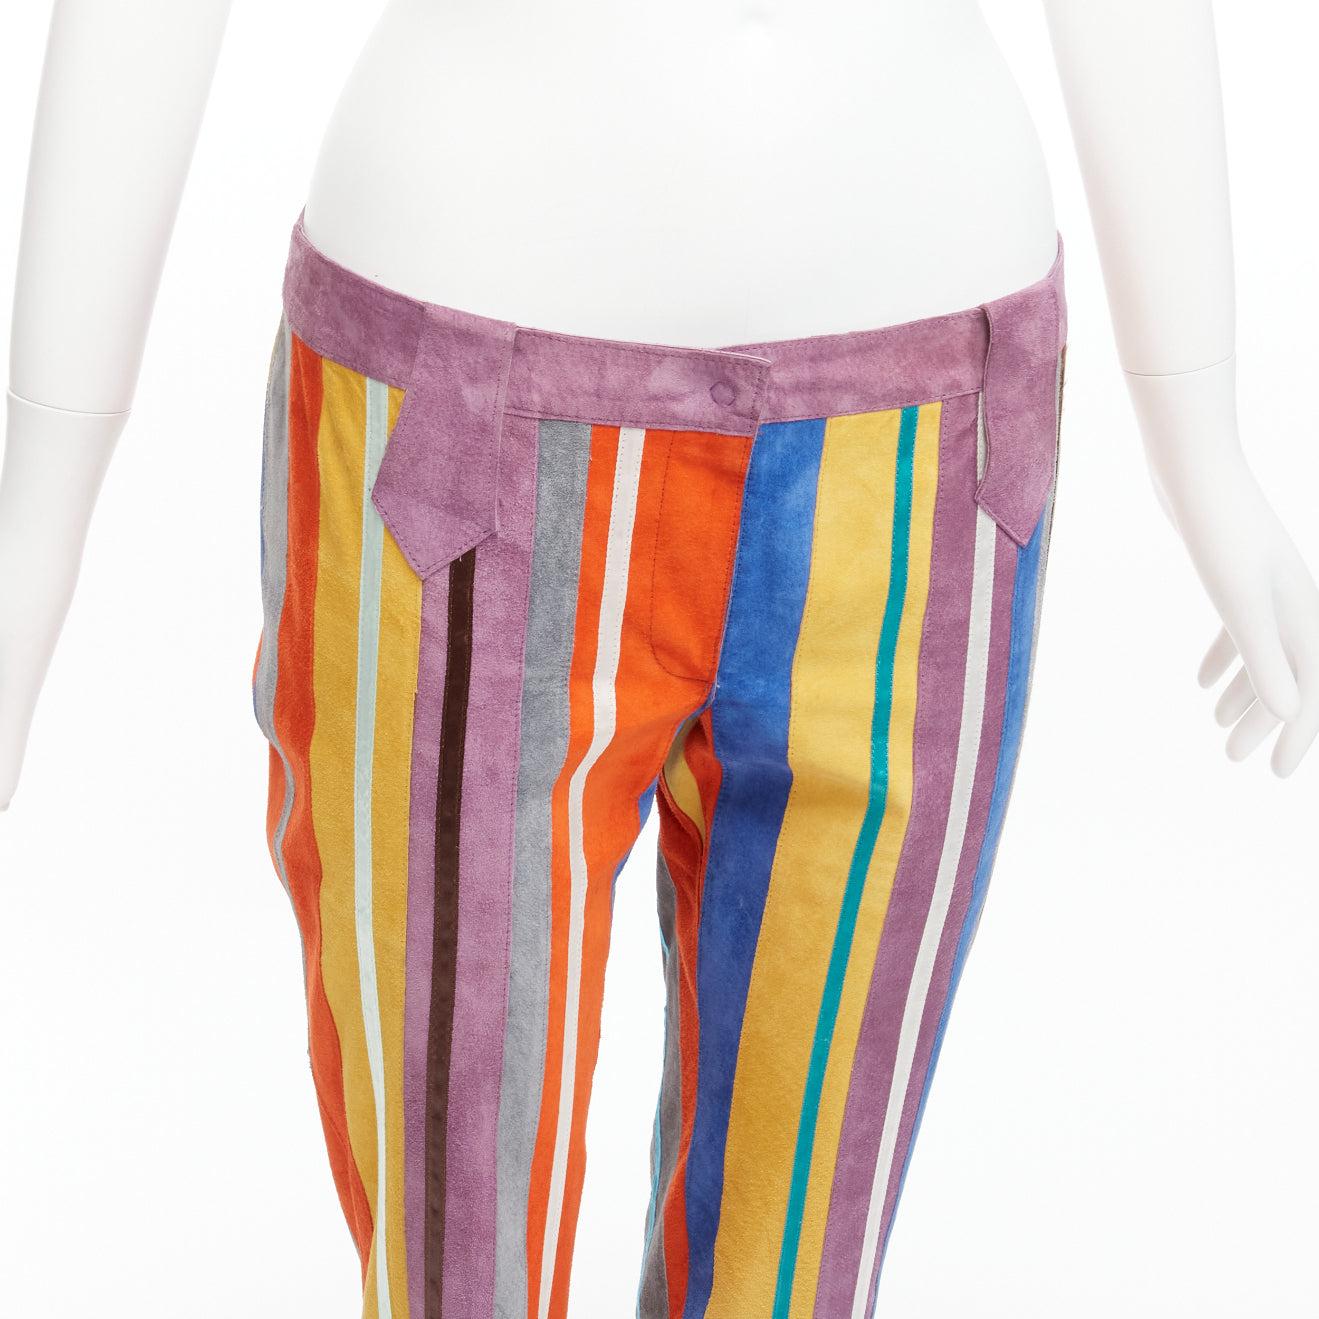 DOLCE GABBANA 2002 Vintage Runway rainbow suede patchwork straight pants S Gisele
Reference: TGAS/D00736
Brand: Dolce Gabbana
Designer: Domenico Dolce and Stefano Gabbana
Collection: 2002 - Runway
As seen on: Emily Ratajkowski, Gisele